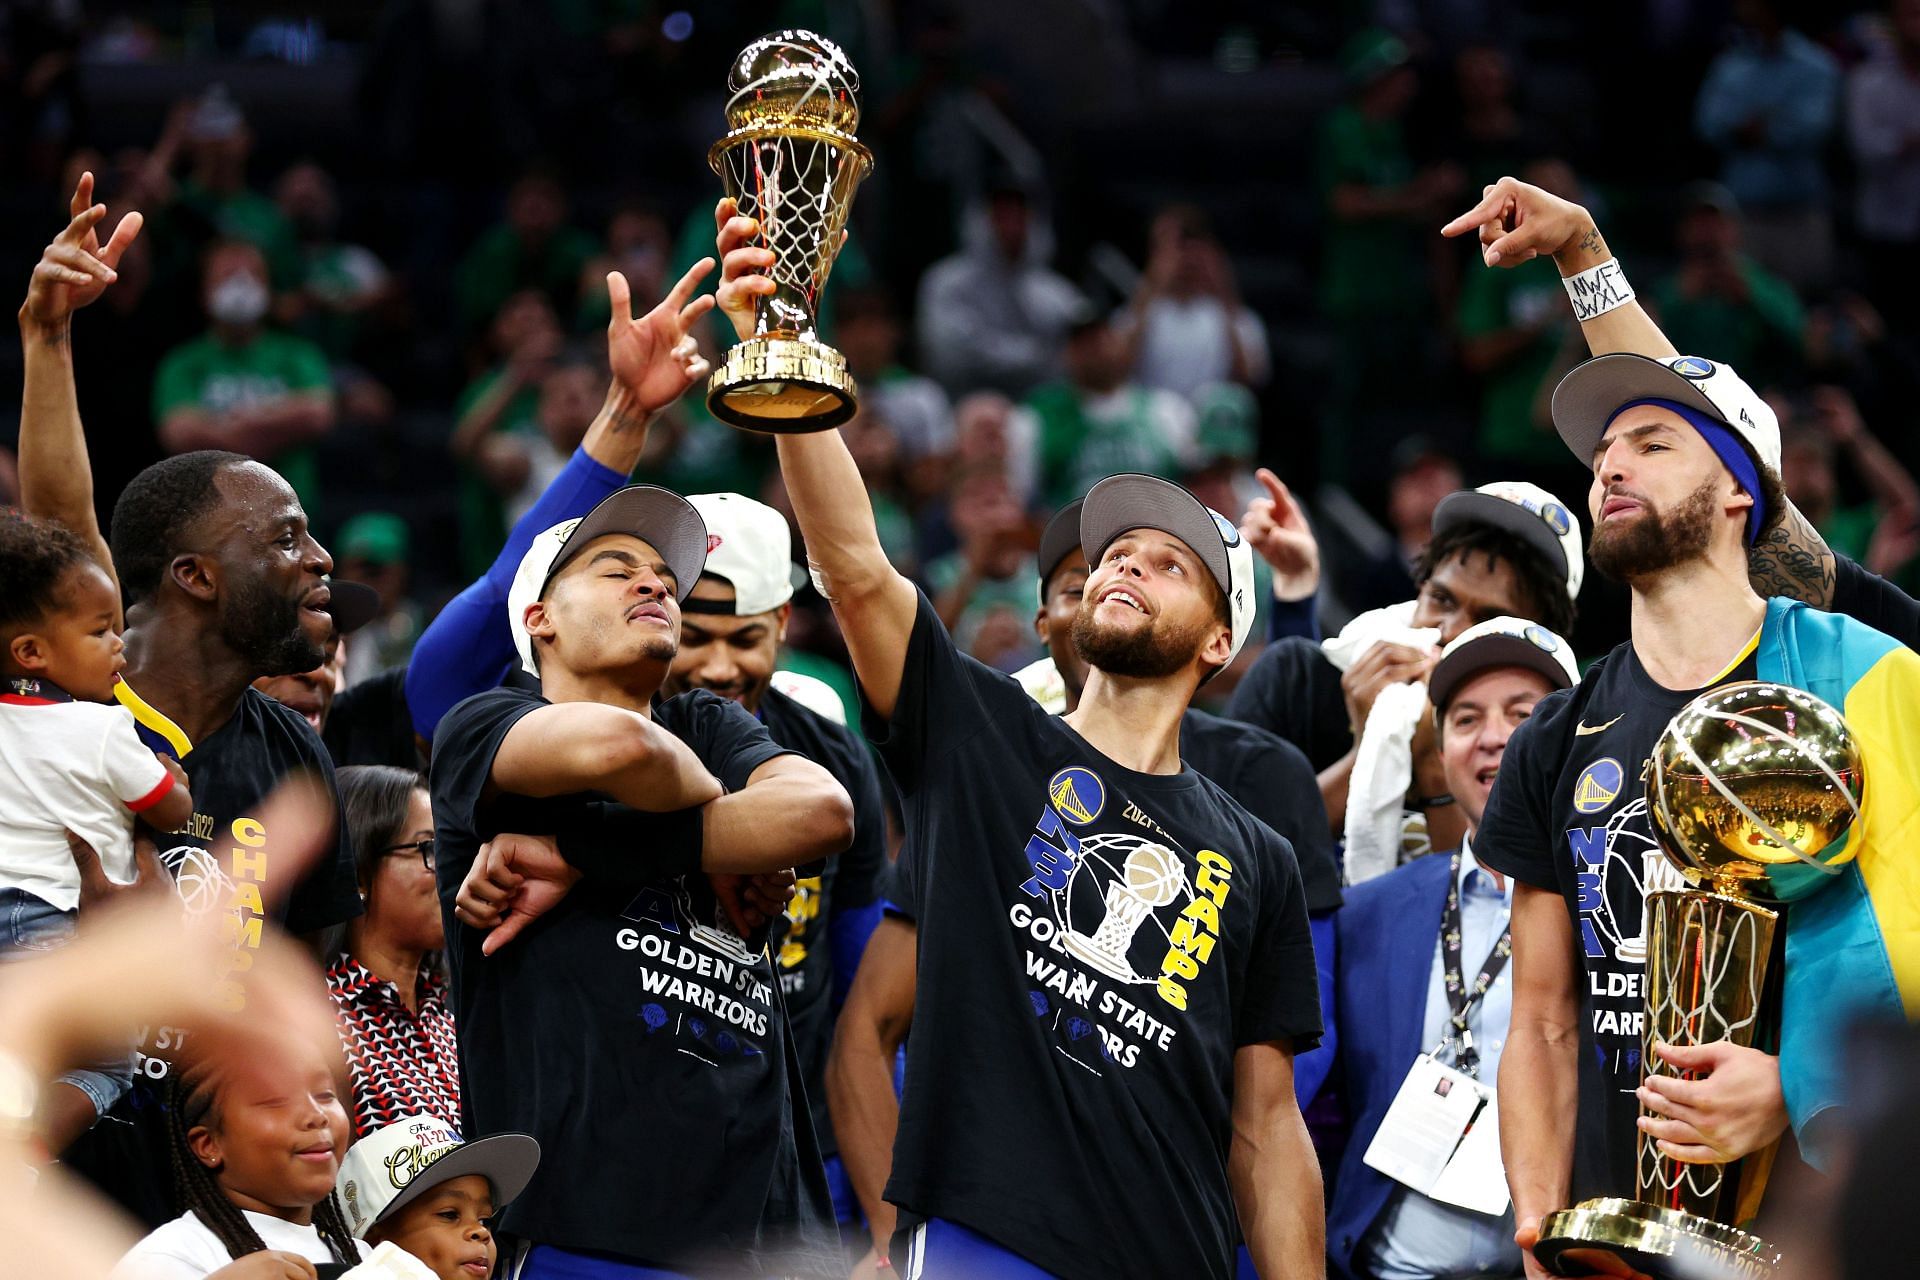 The Golden State Warriors won the 2022 NBA championship.